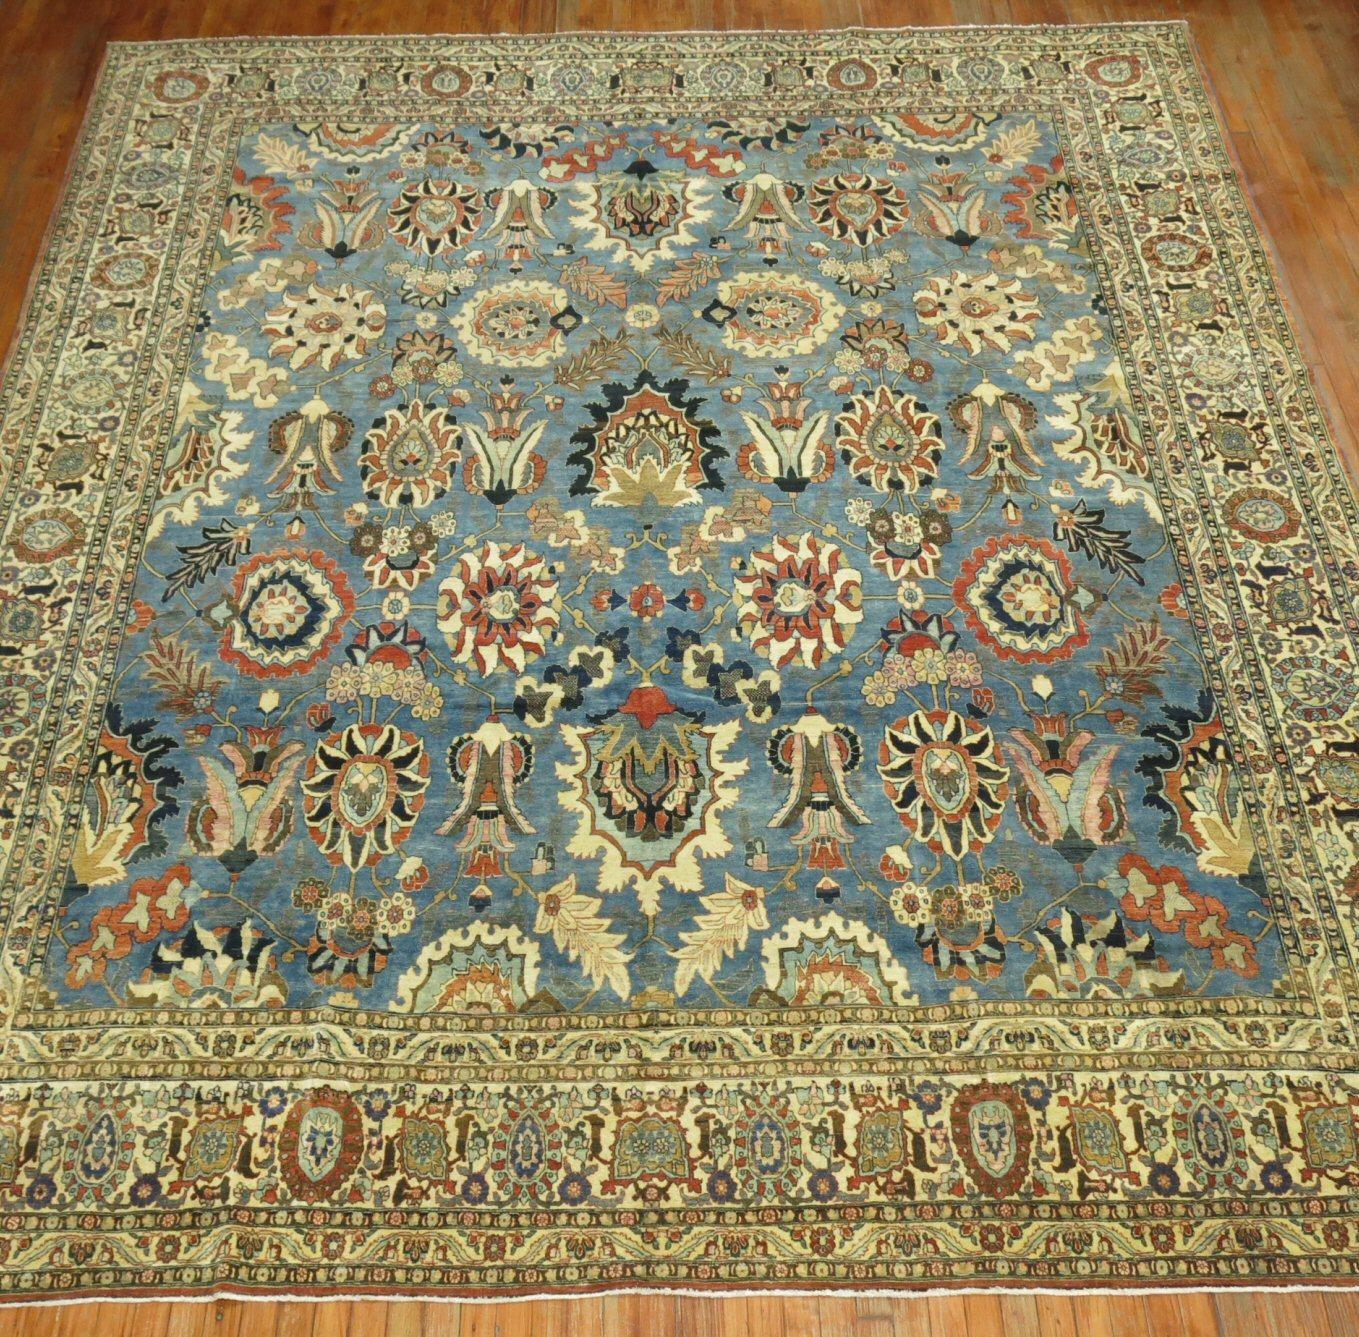 Stunning Persian Tabriz rug with an astonishing large scale all-over palette in stunning blues, apricots, creams, orangey rust and umber. The quality is extremely fine, the patina and texture quite fascinating. The piece grabs your heart the moment